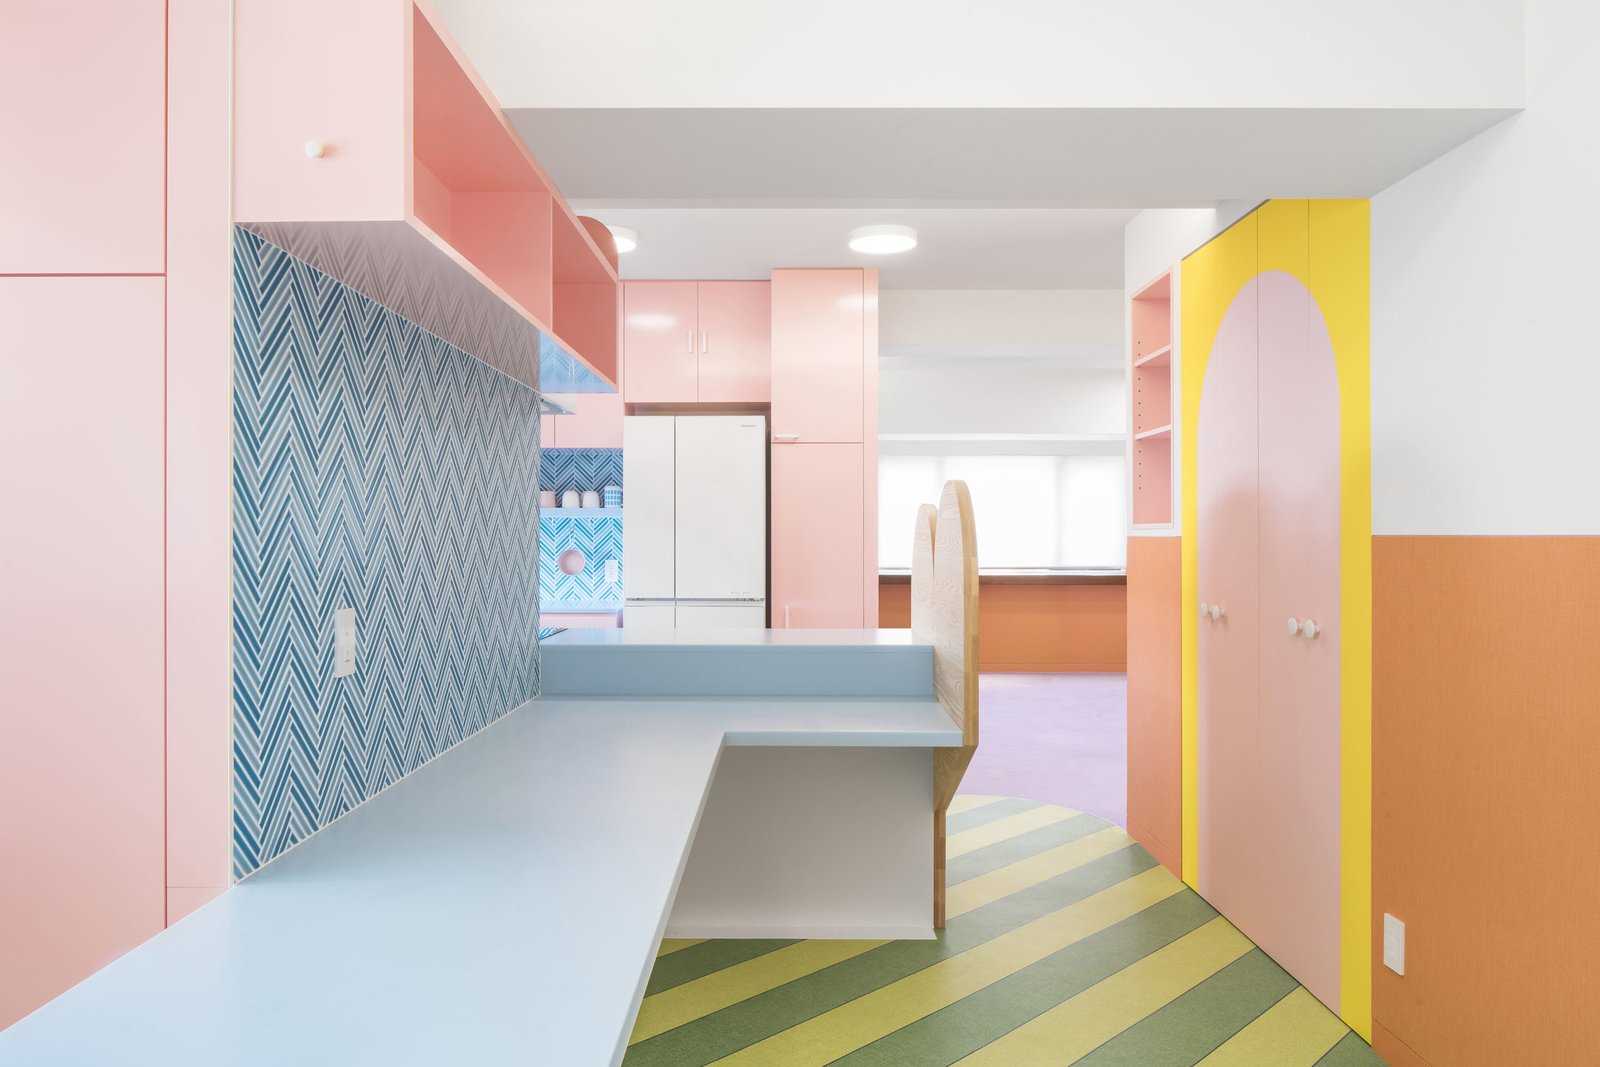 "We went through numerous palettes and found that pastels, punctuated by moments of bright saturation and natural materials, imbued the spaces with joy," he says. 